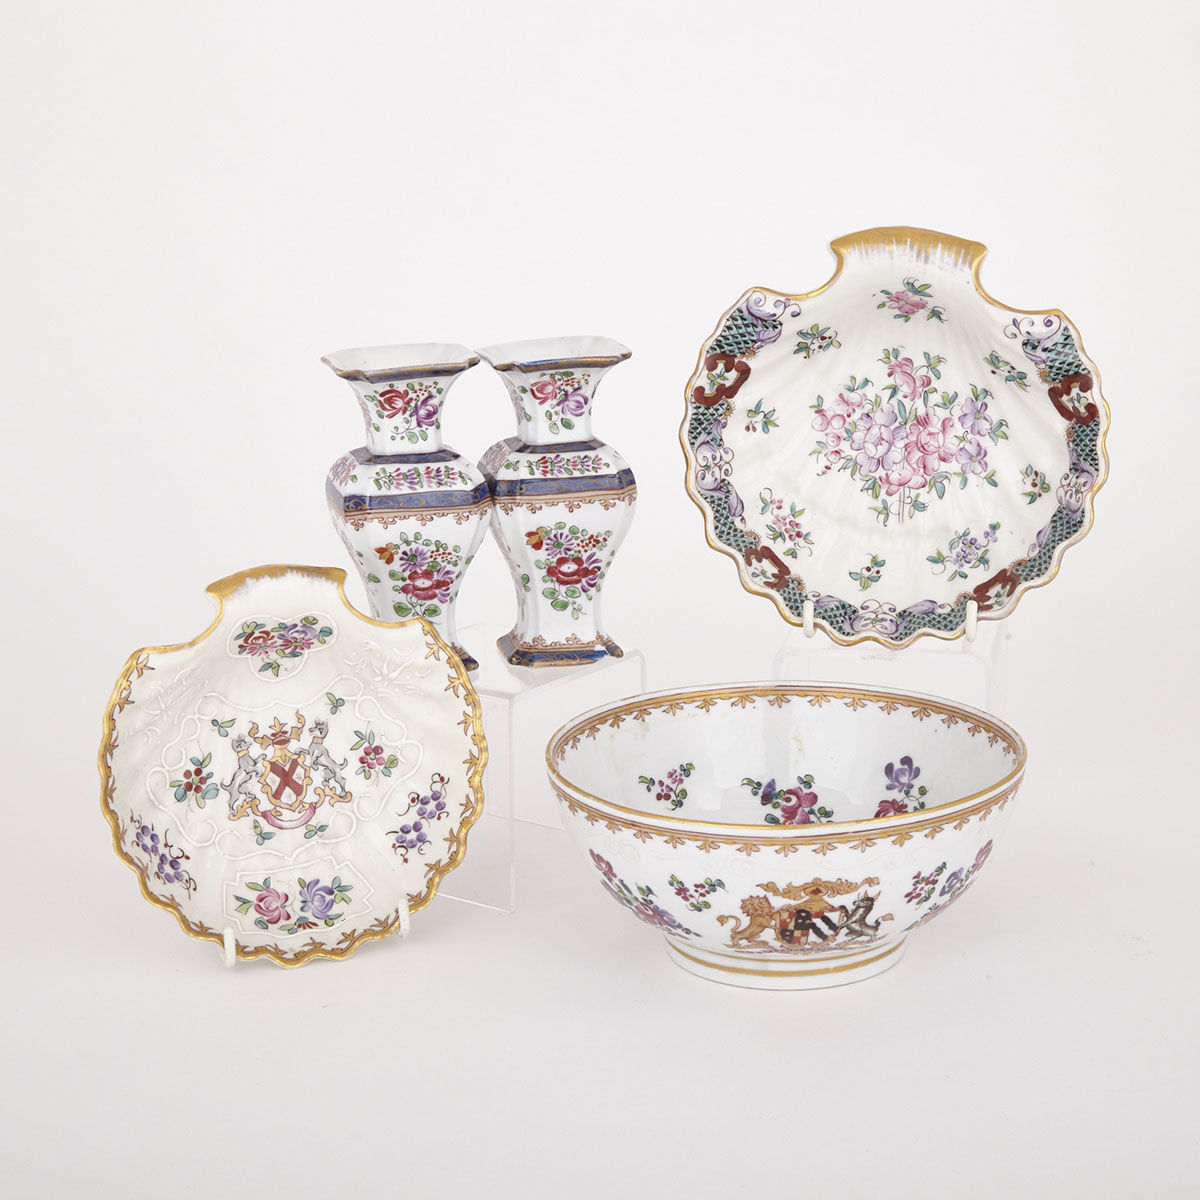 Pair of Samson ‘Compagnie des Indes’ Small Vases, Bowl and Two Shell Shaped Dishes, c.1900